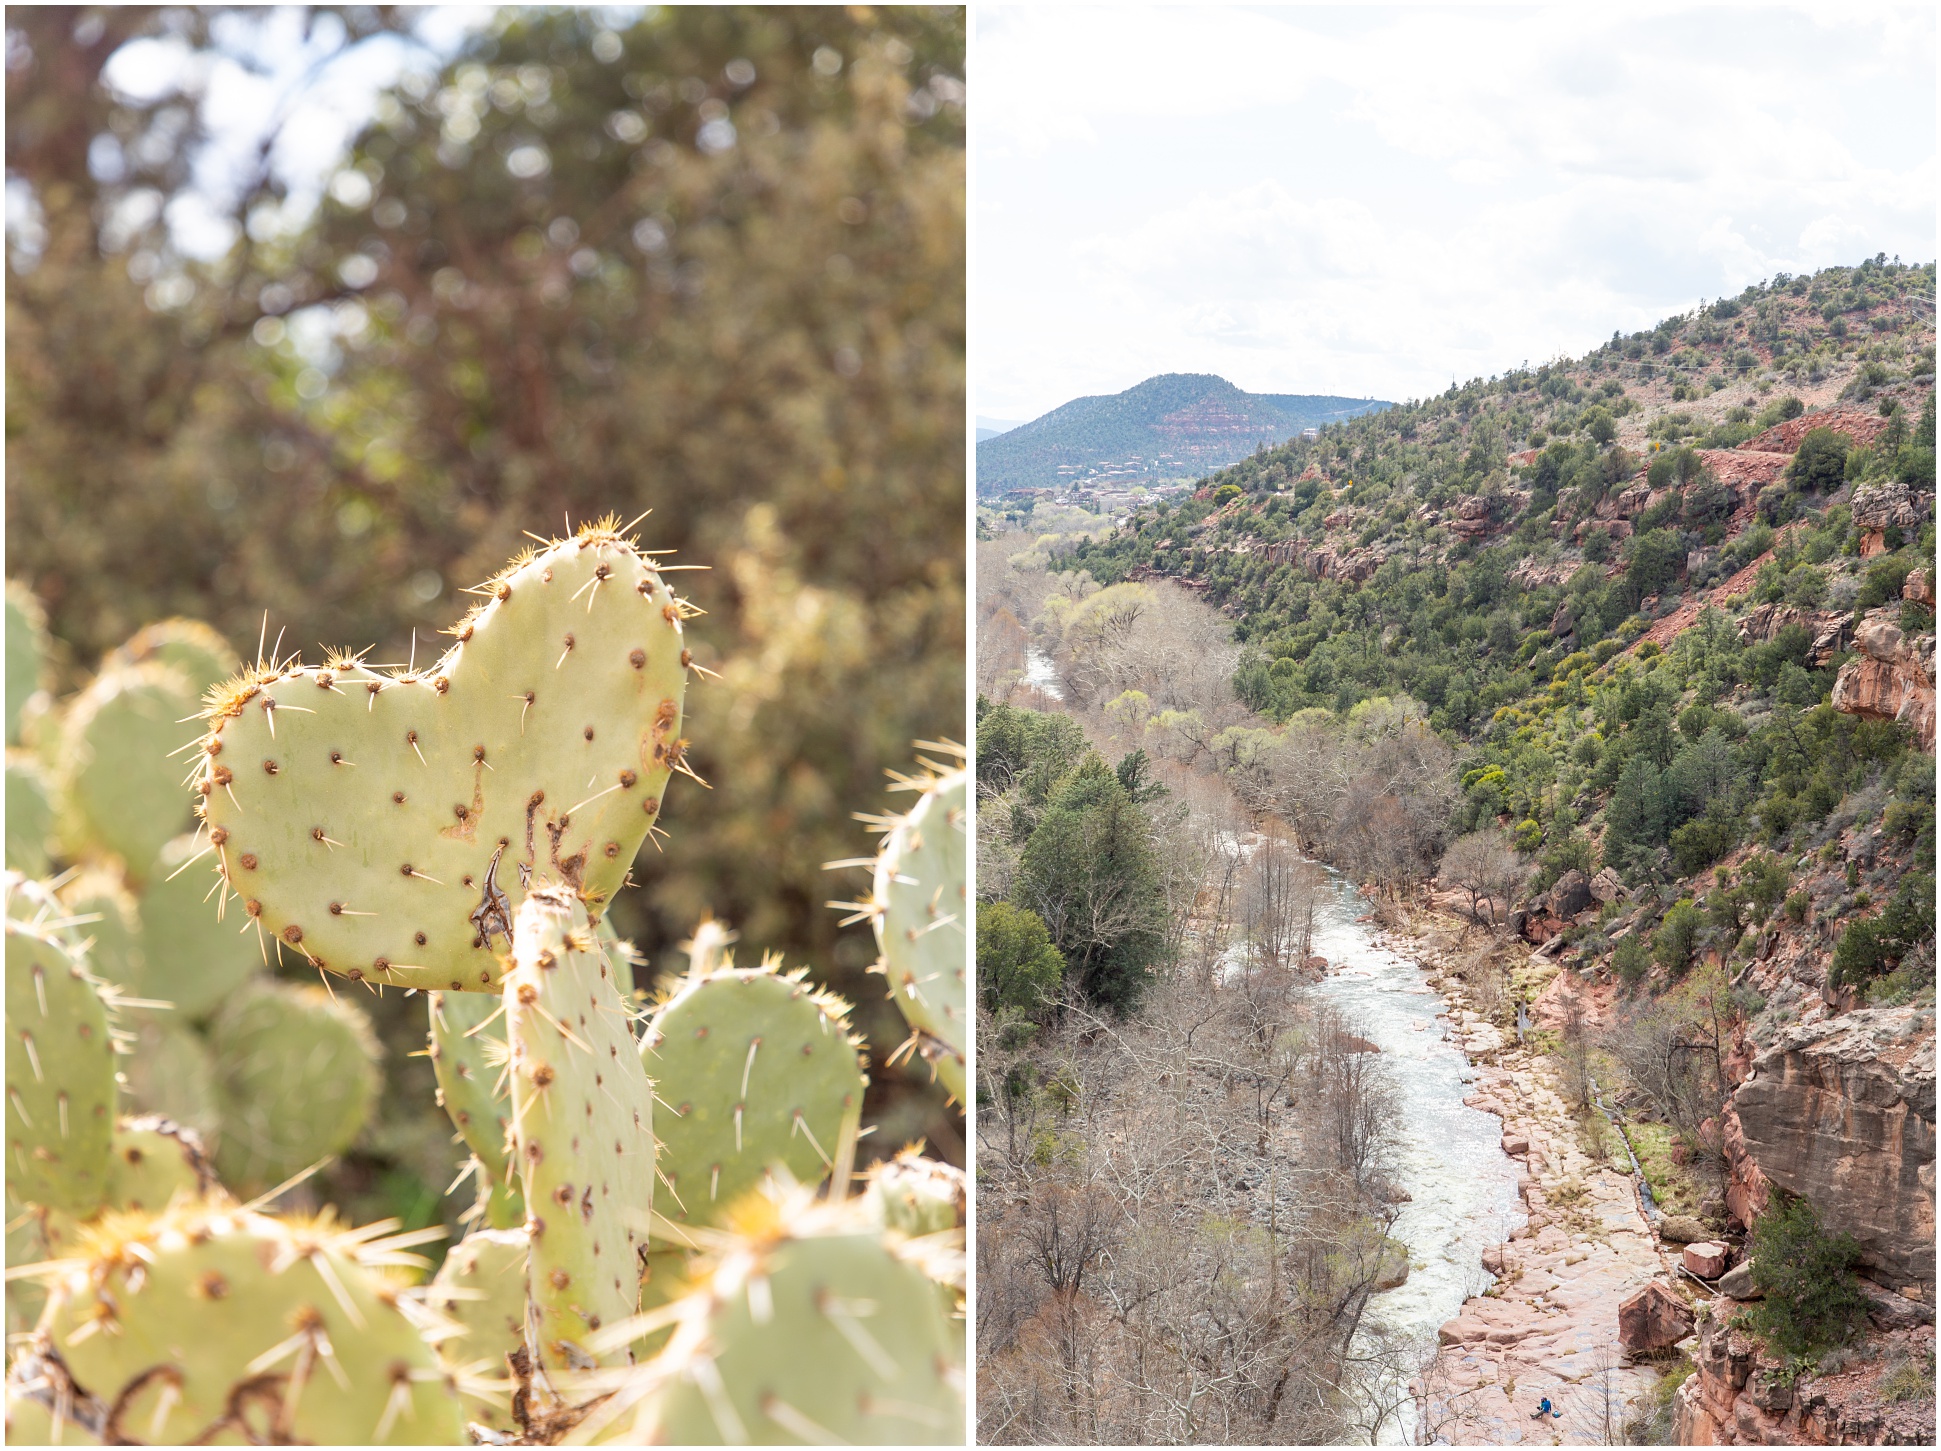 Left: Heart Shaped Prickly Pear, Right: The Colorado River